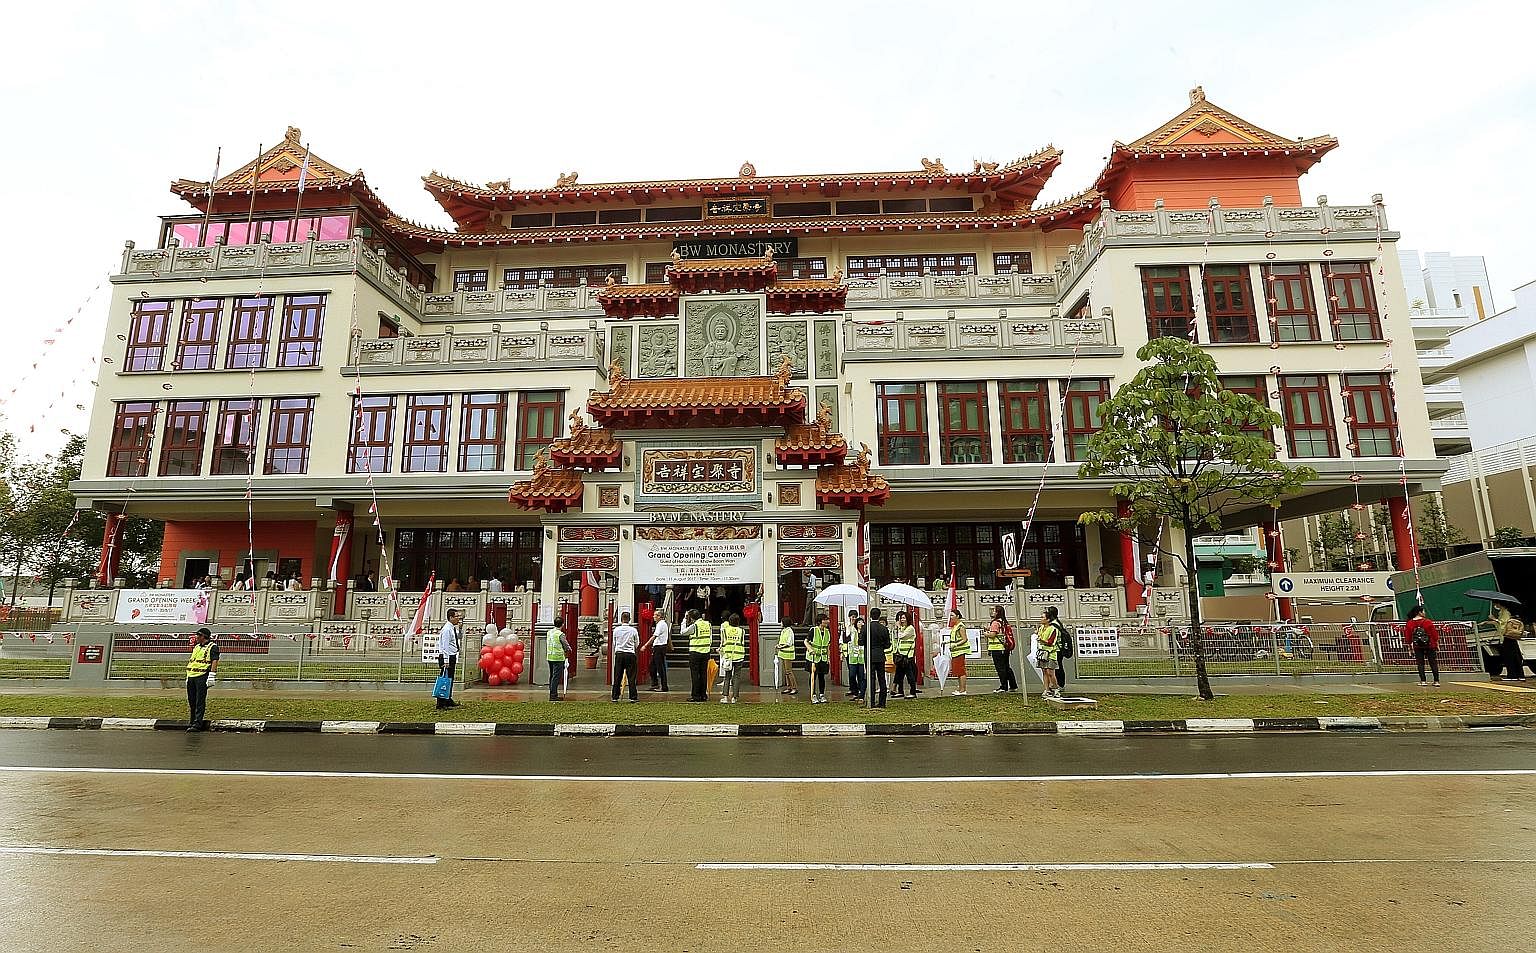 Growing membership in a Buddhist organisation has seen it look north for more real estate. Yesterday, the 15-year-old BW Monastery officially opened its new headquarters in Woodlands. The four-storey complex is the size of about 30 five-room HDB flat